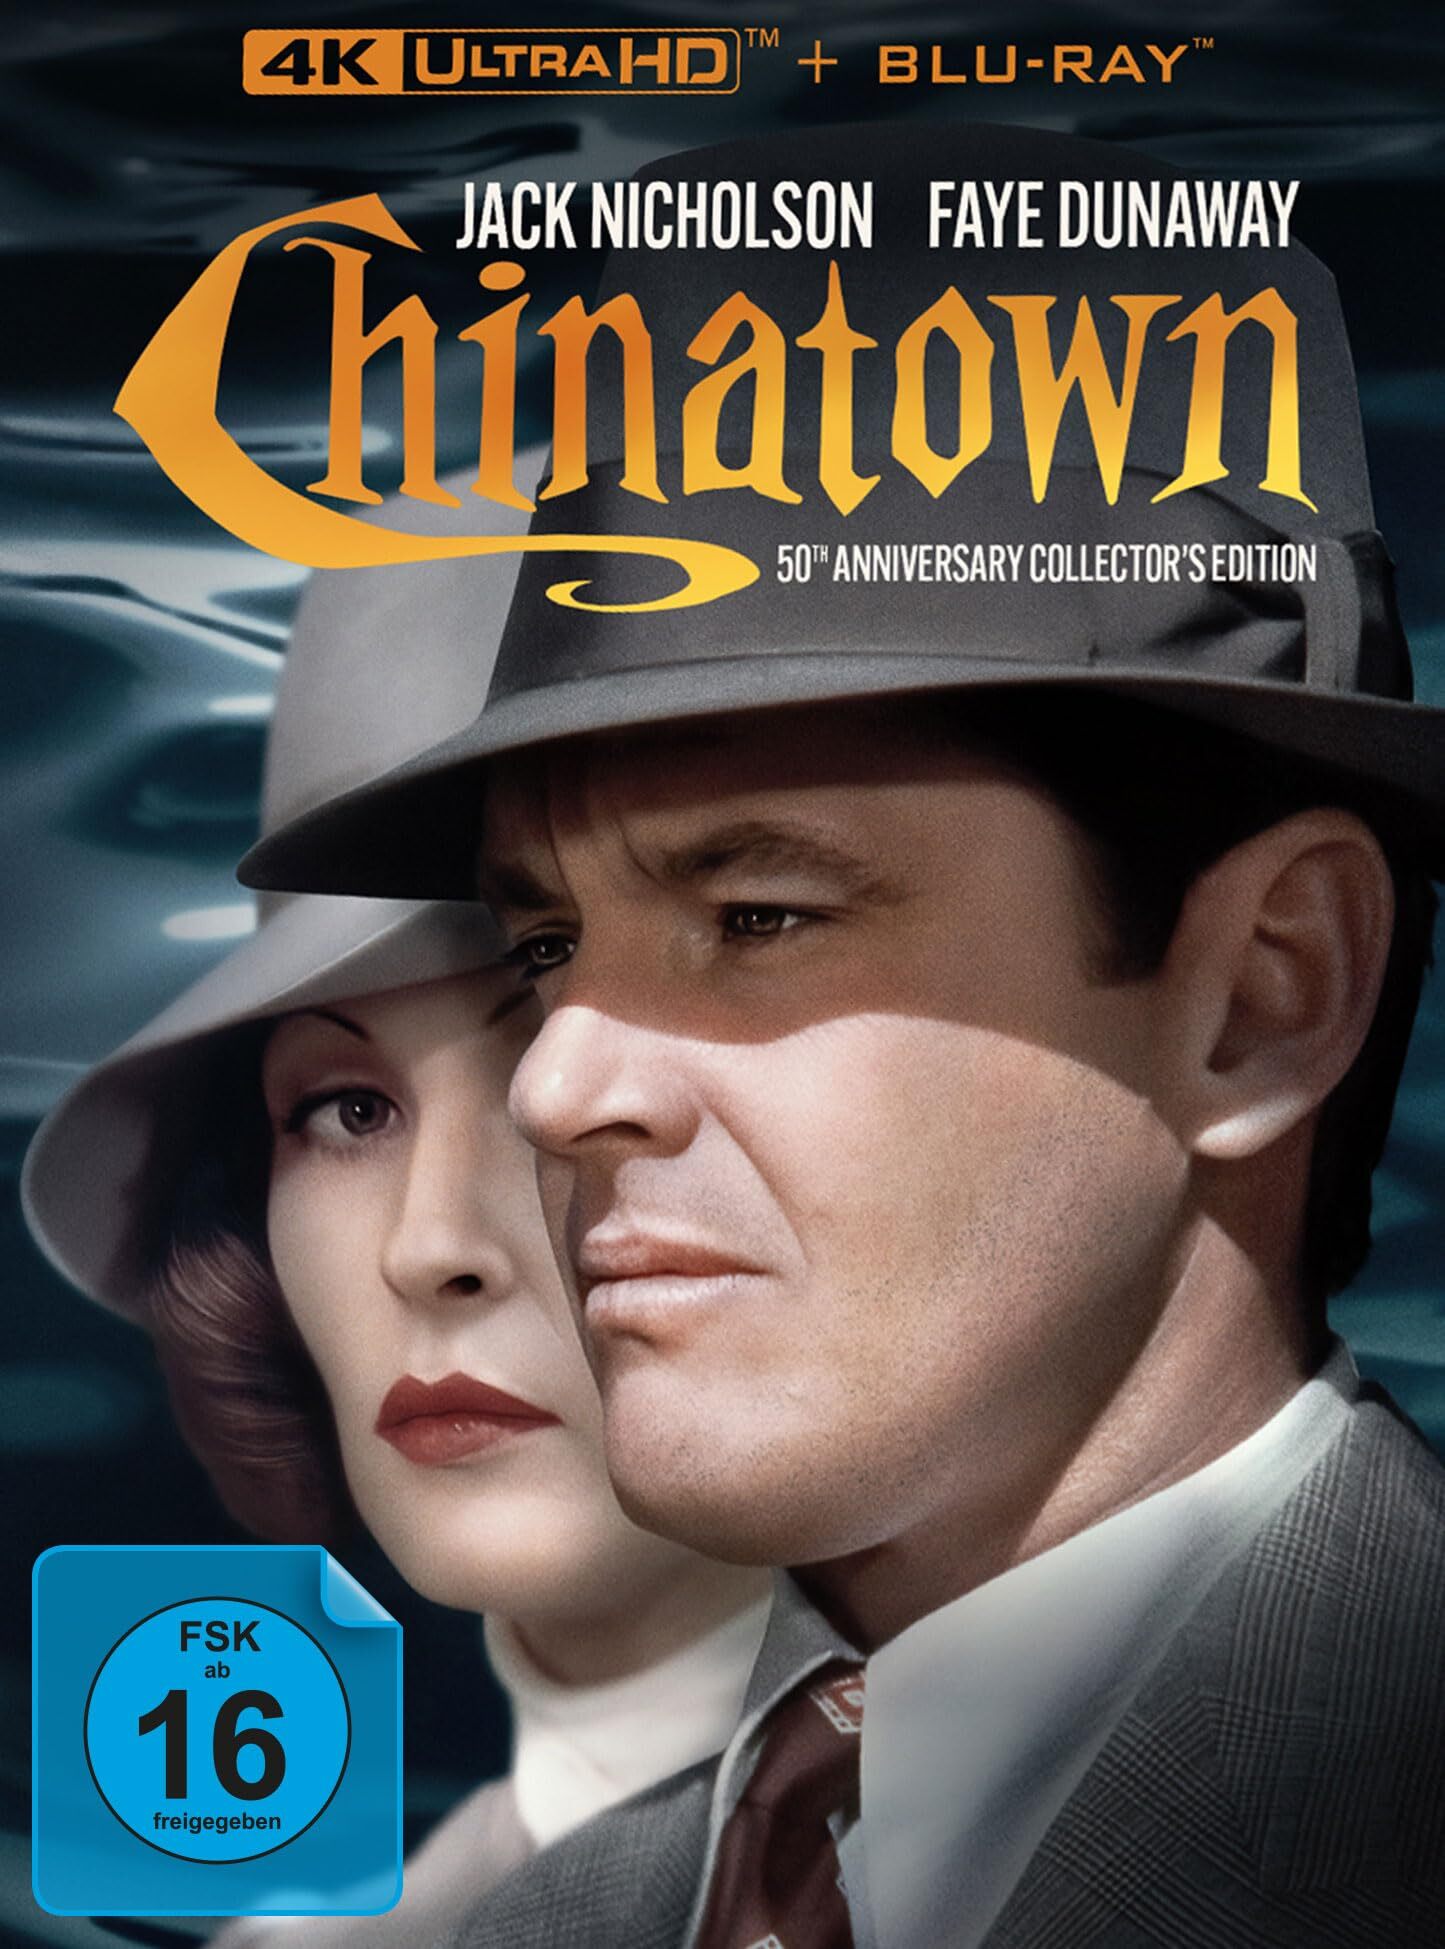 Chinatown 4K Blu-ray (50th Anniversary Collector's Edition) (Germany)